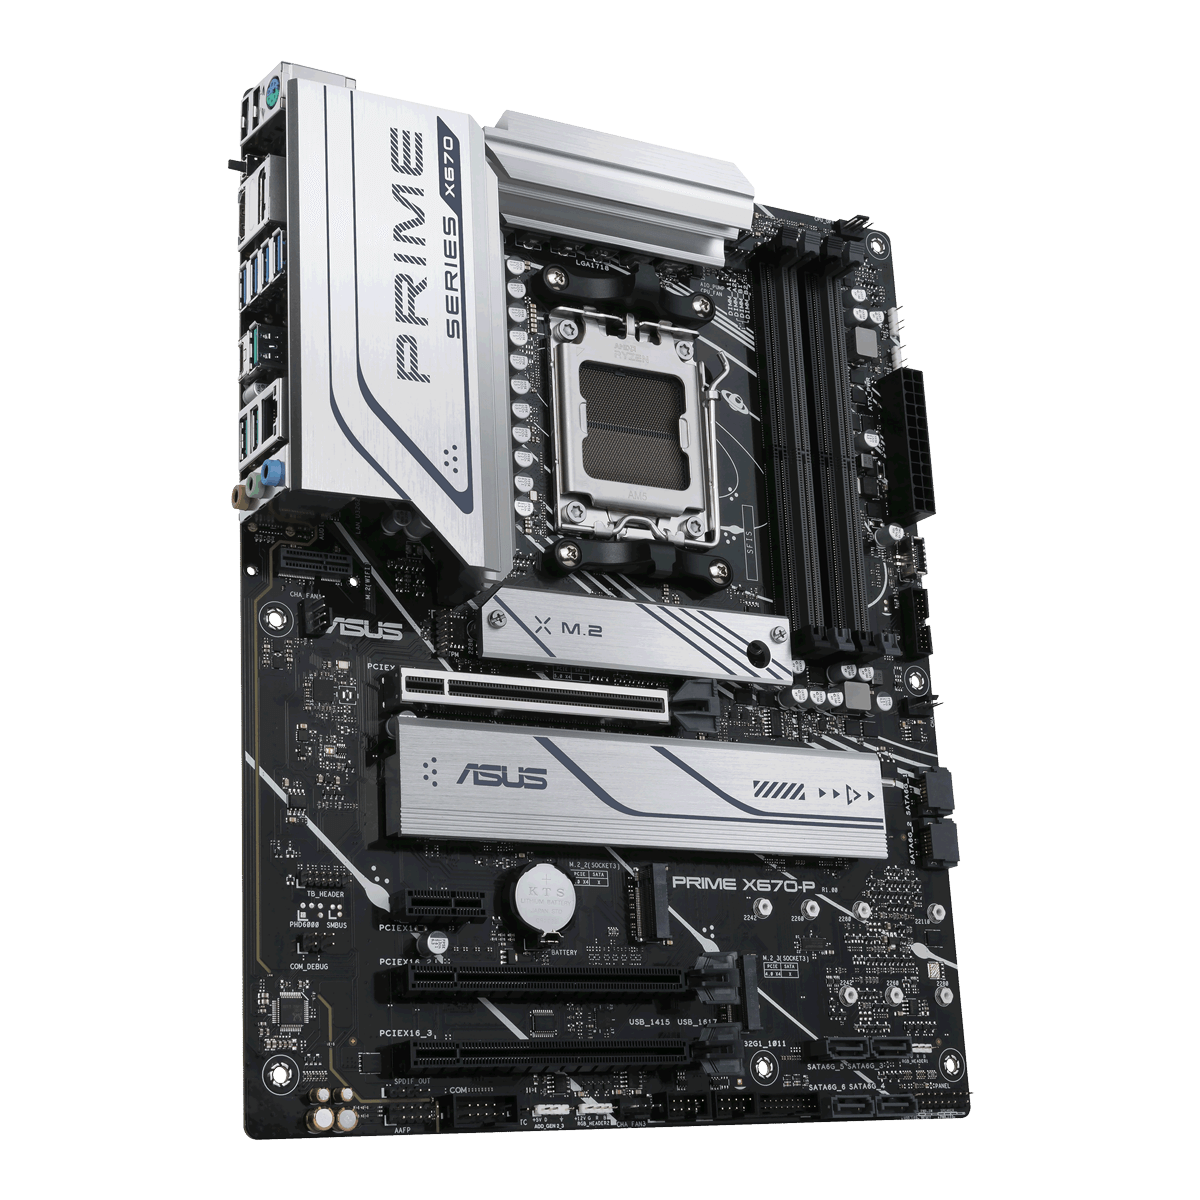 The PRIME X670-P-CSM motherboard features Aura Sync. 